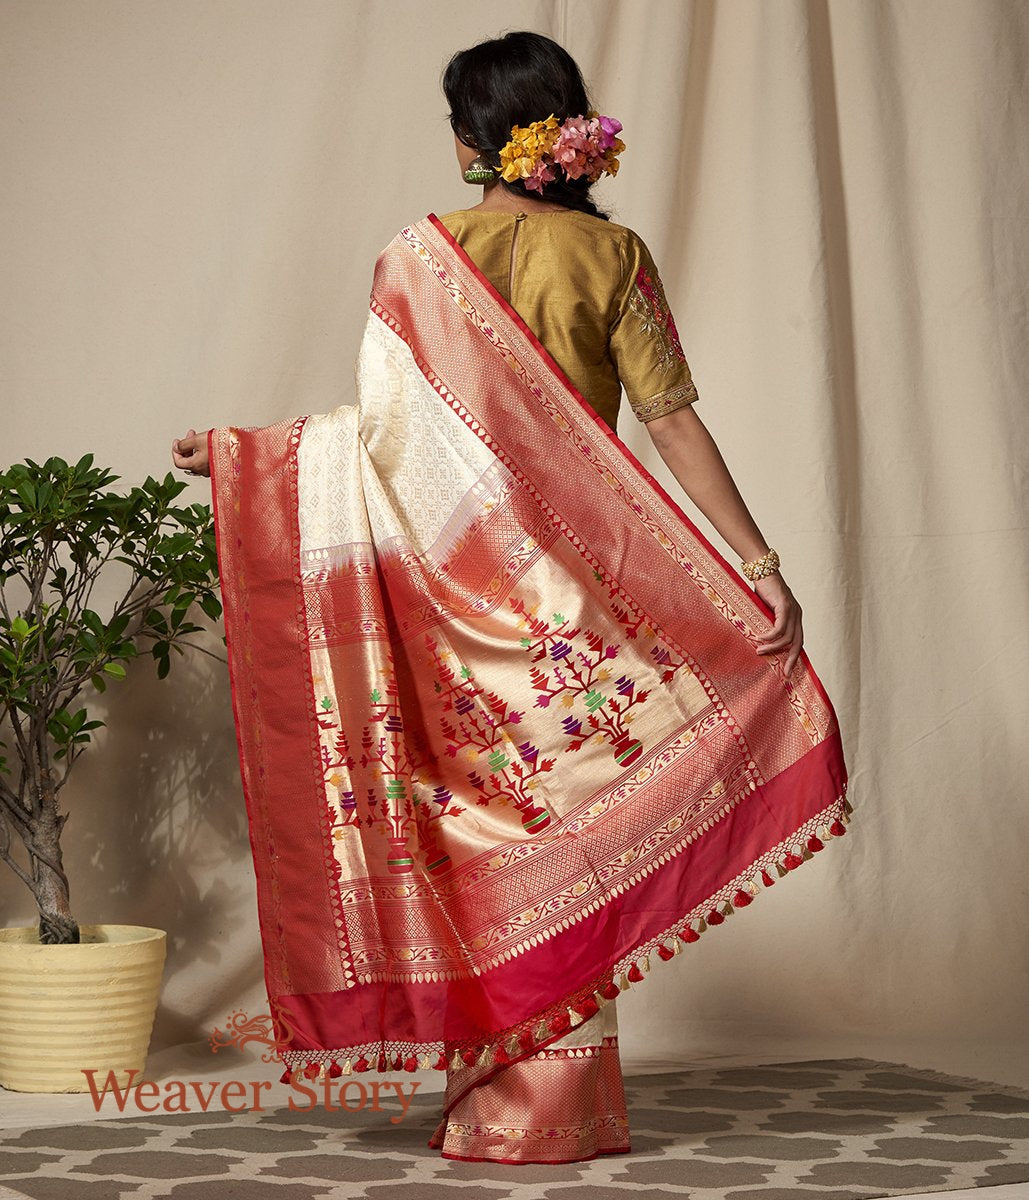 Handloom_OffWhite_and_Gold_Kimkhab_Saree_with_Red_Border_and_Pallu_WeaverStory_03